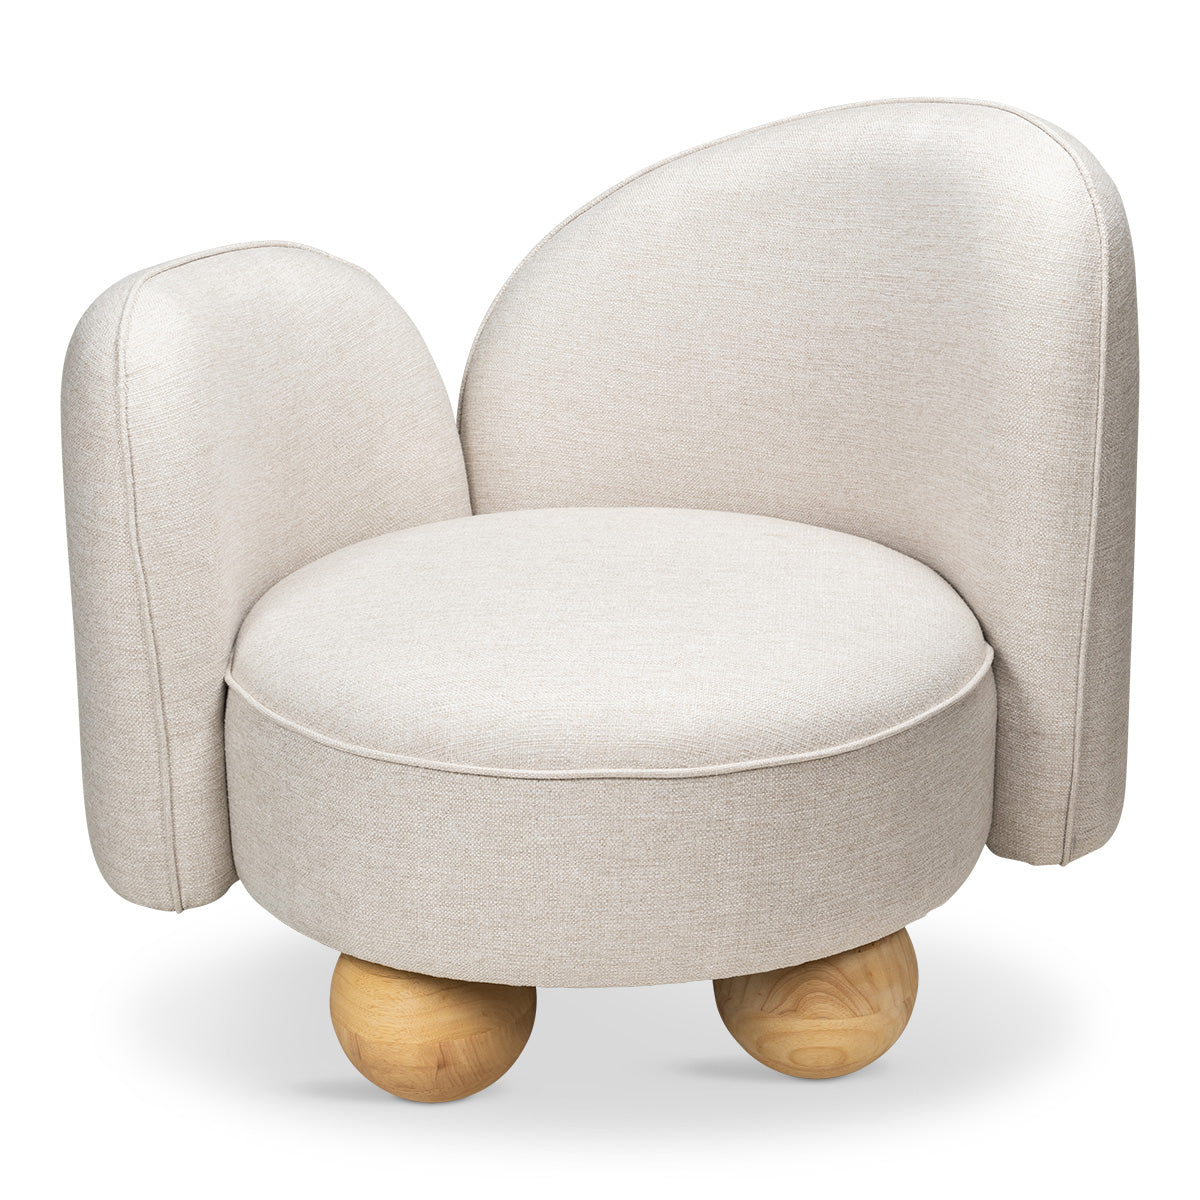 Fountainbleau Occasional Chair in Oatmeal Linen